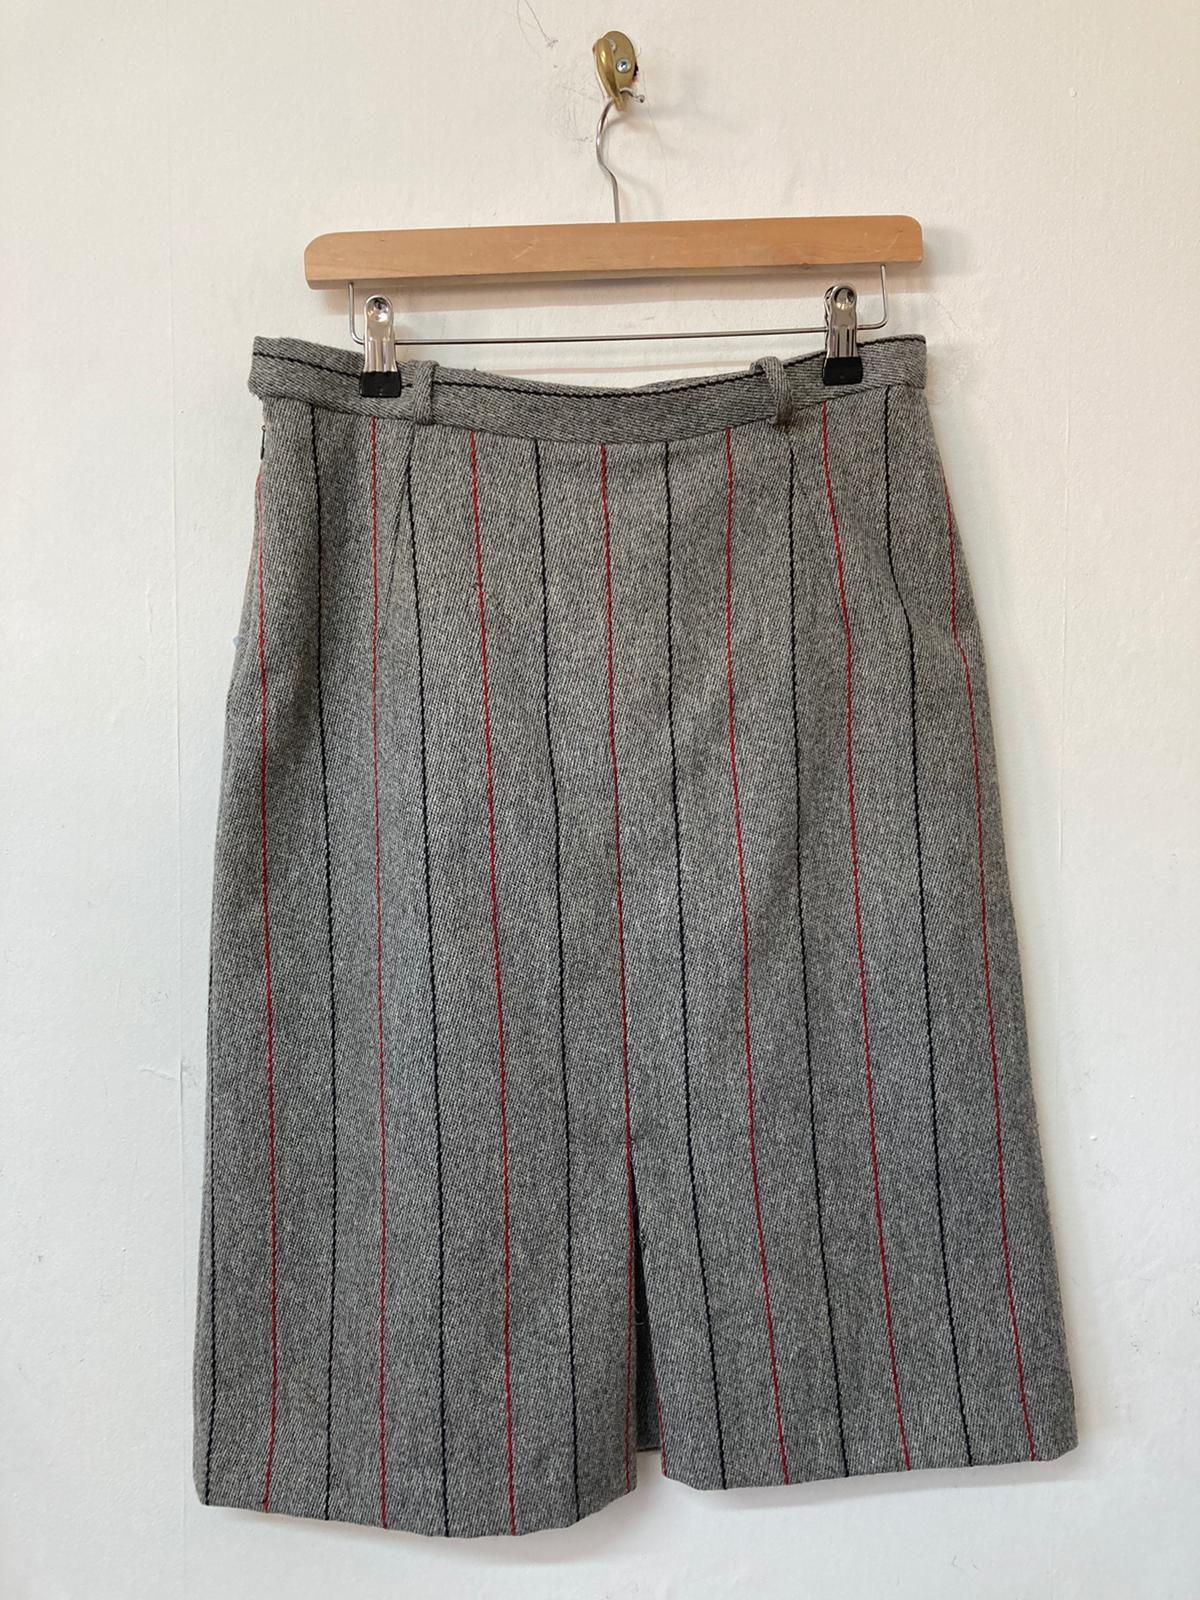 Vintage Grey and Red Dereta Wool Striped Skirt Size 12